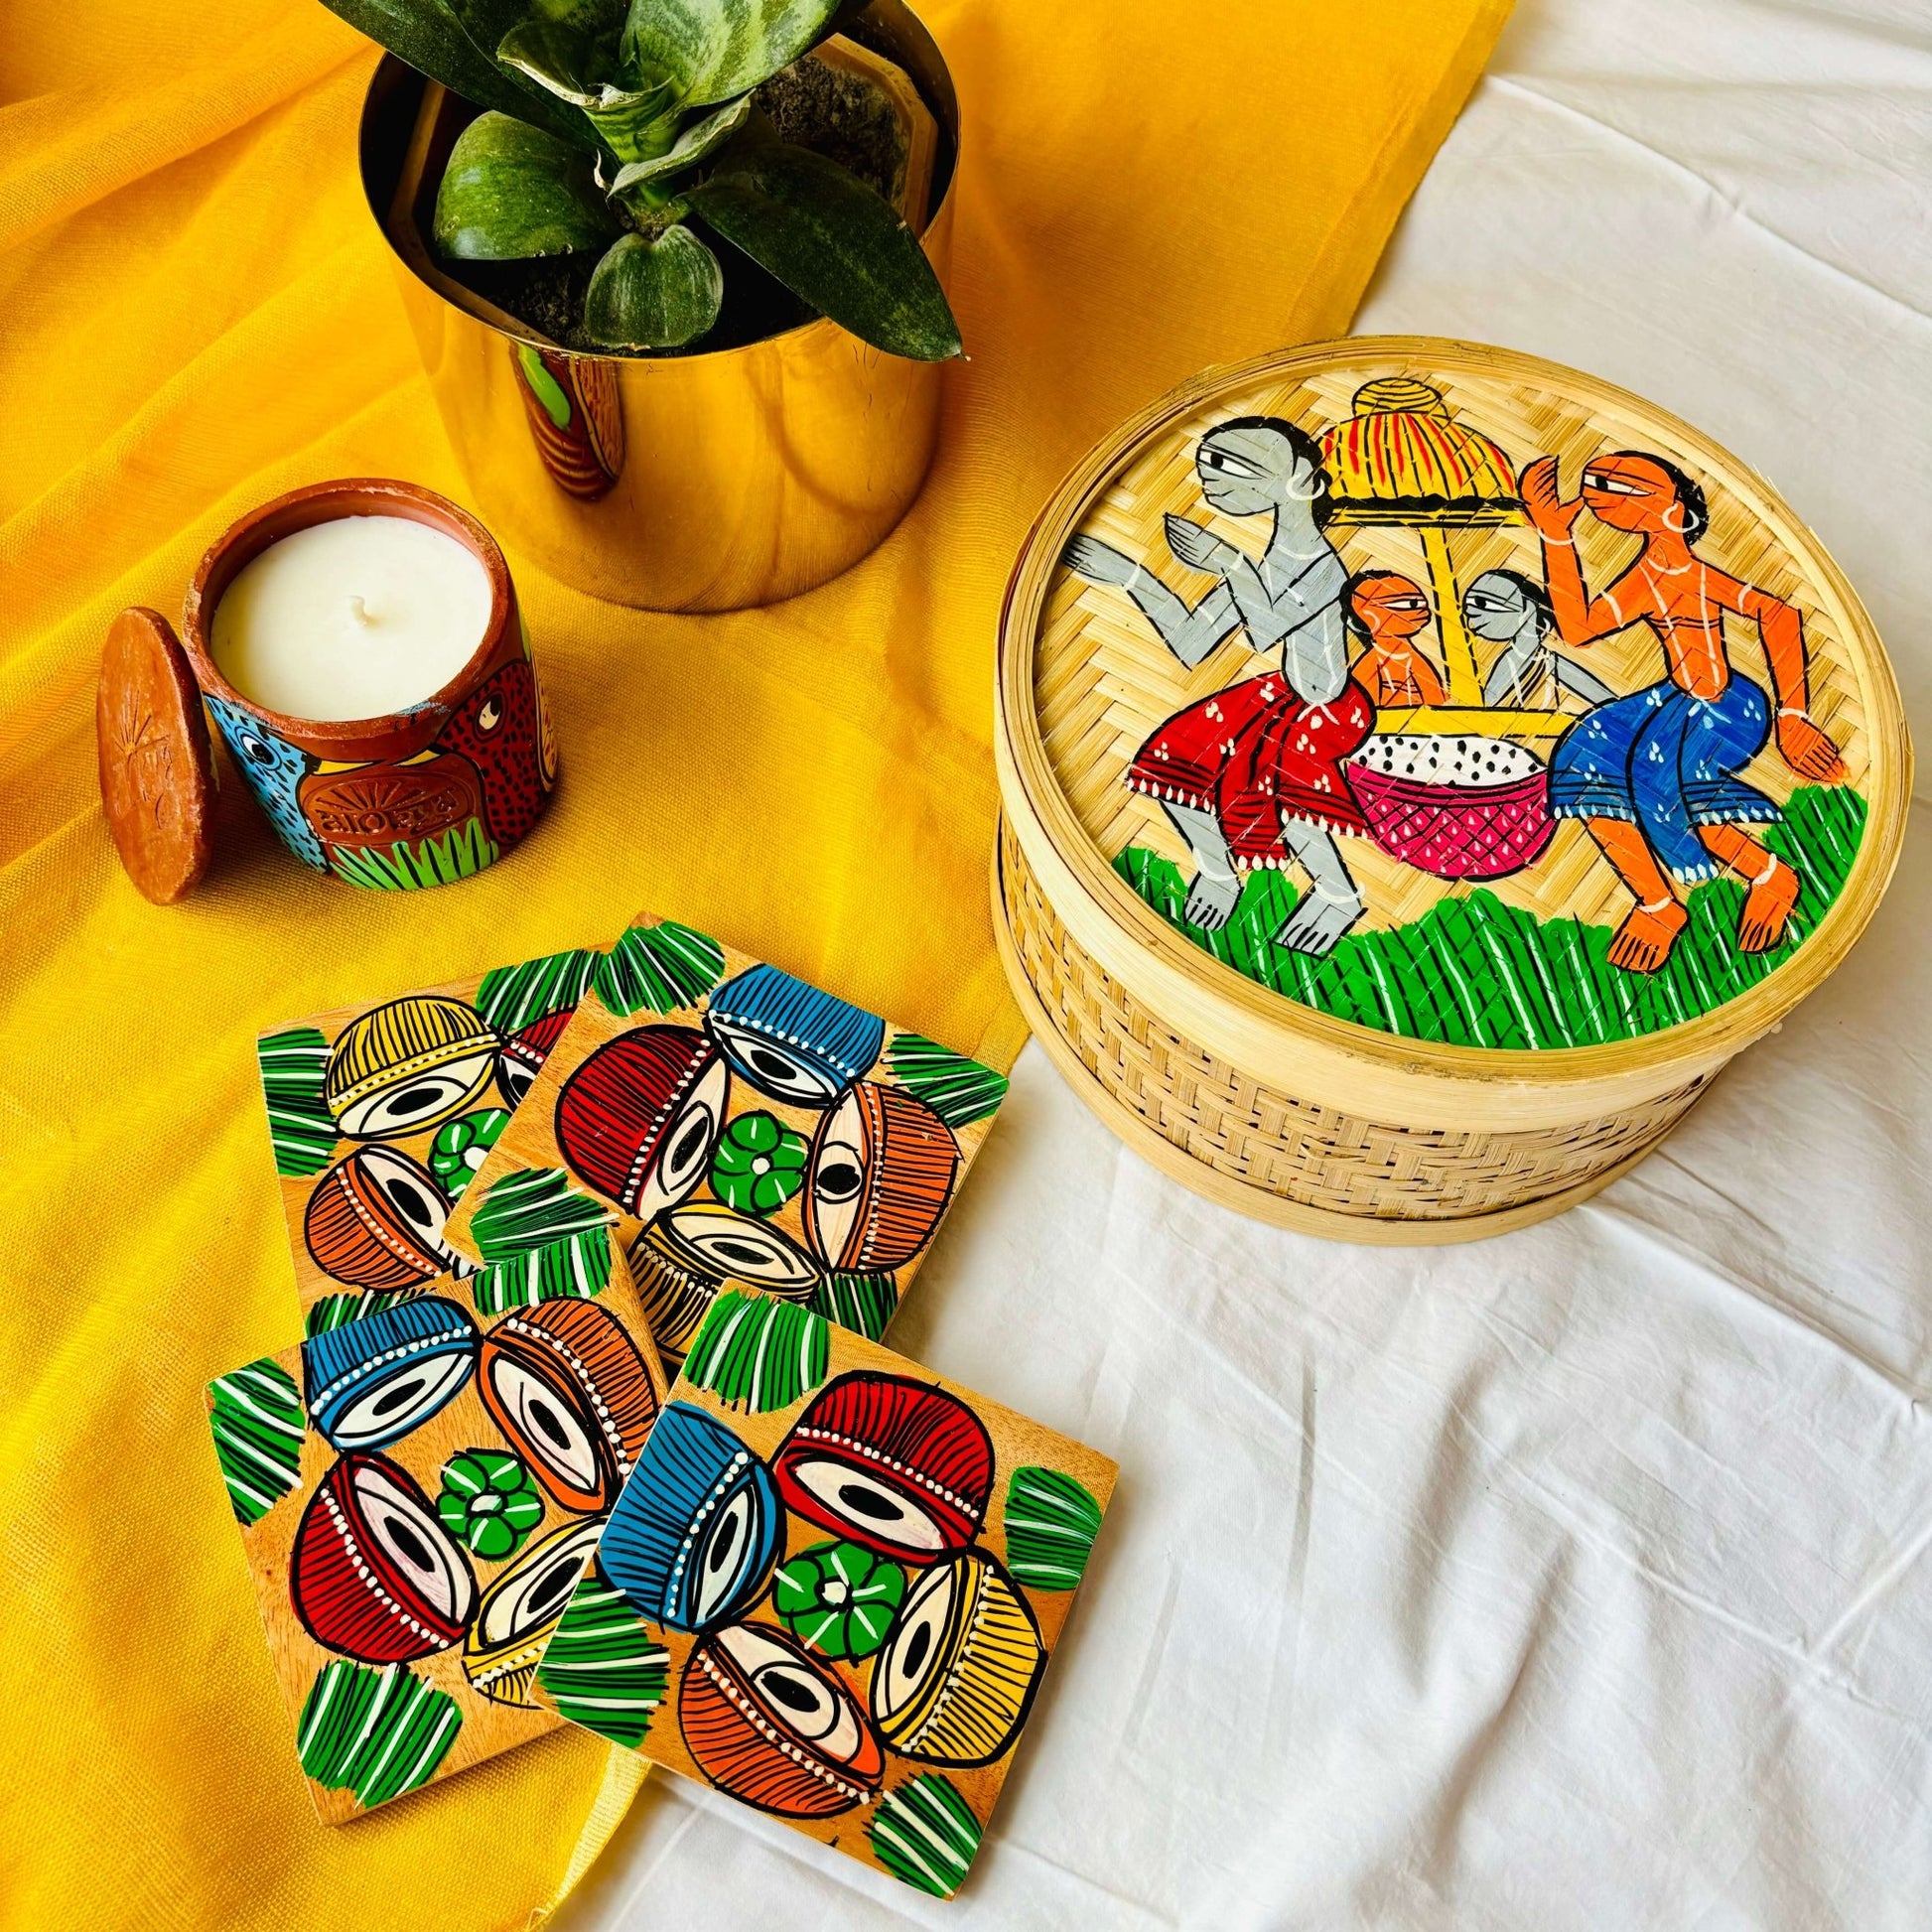 One hand-woven bamboo fruit box hand painted with a motif of tribal characters indulged in a wedding celebration, a set of four square wood coasters hand painted with a motif of musical instrument, and a double wick scented candle, all displayed against a yellow background with a plant pot beside them